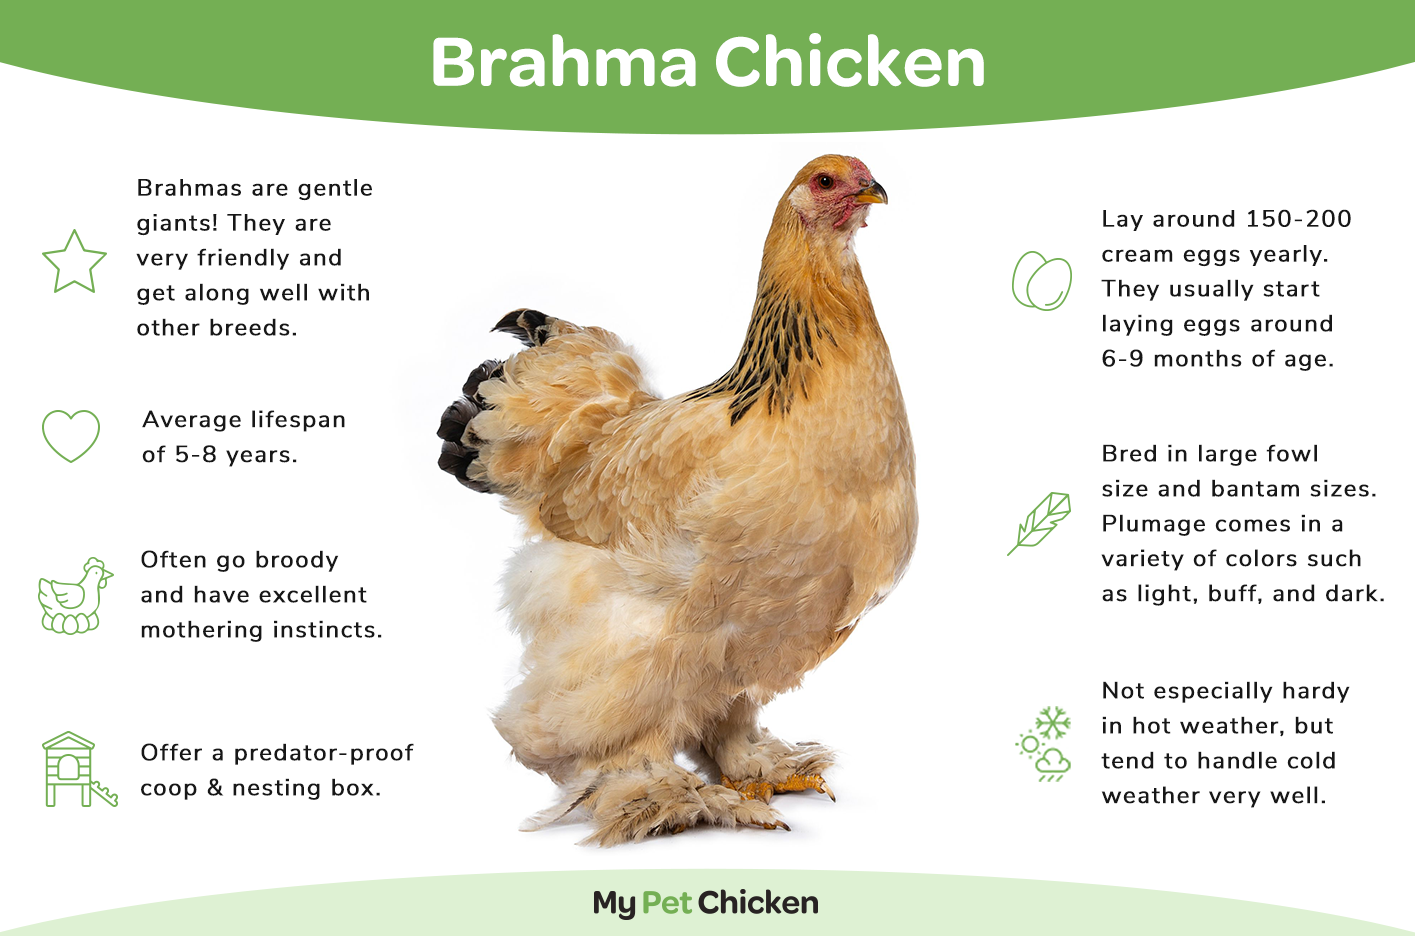 The Brahma chicken breed is friendly and make great mothers.